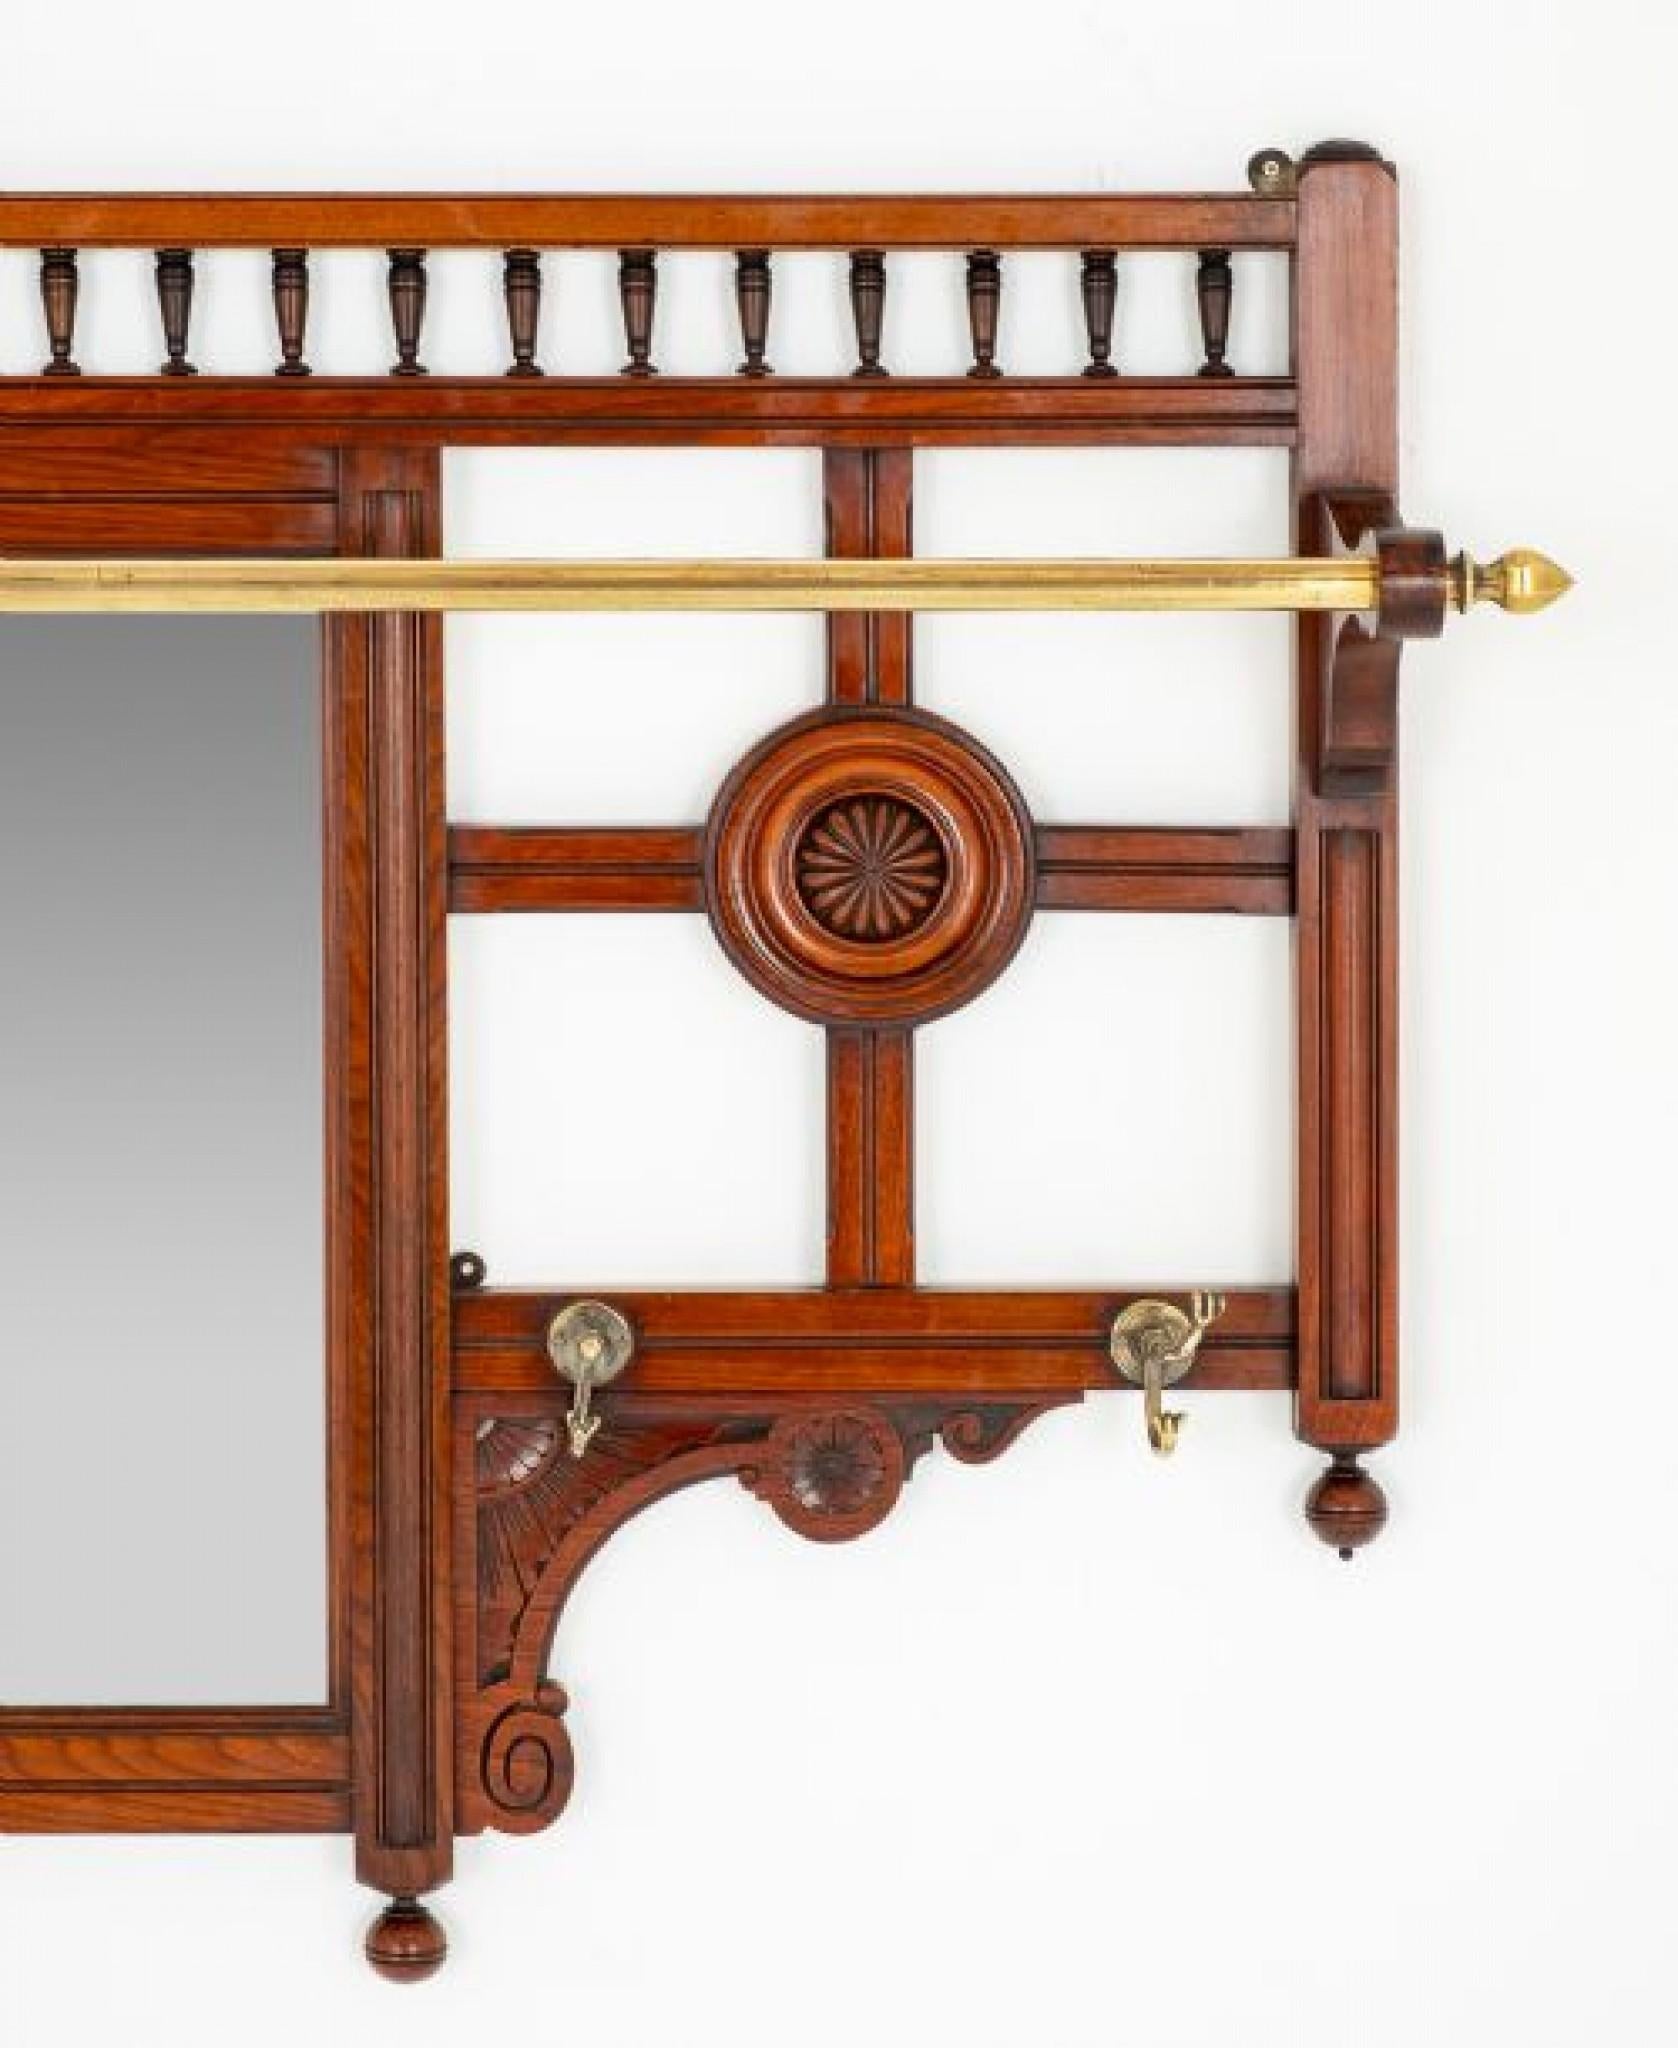 Victorian Mahogany Hall tree.
This Hall Tree Features a Central Mirror Flanked by Turned inset Roundels.
The Top of the Mirror Being of a Galleried Form.
This Tree Comes Complete with Brass Hanging Hooks and Brass Hanging Rail.